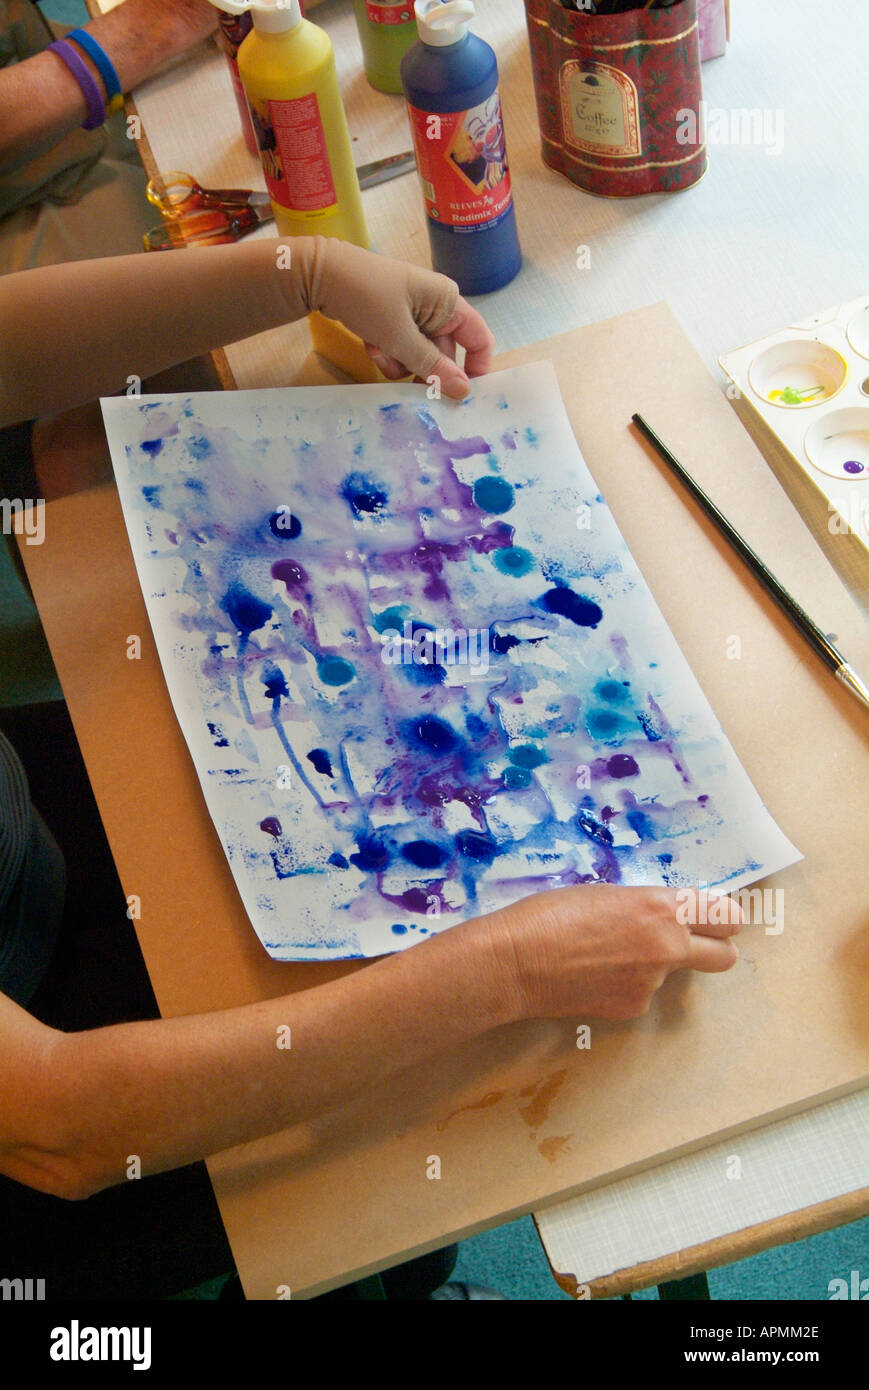 https://c8.alamy.com/comp/APMM2E/painting-therapy-workshop-water-colour-color-table-top-drawing-board-APMM2E.jpg